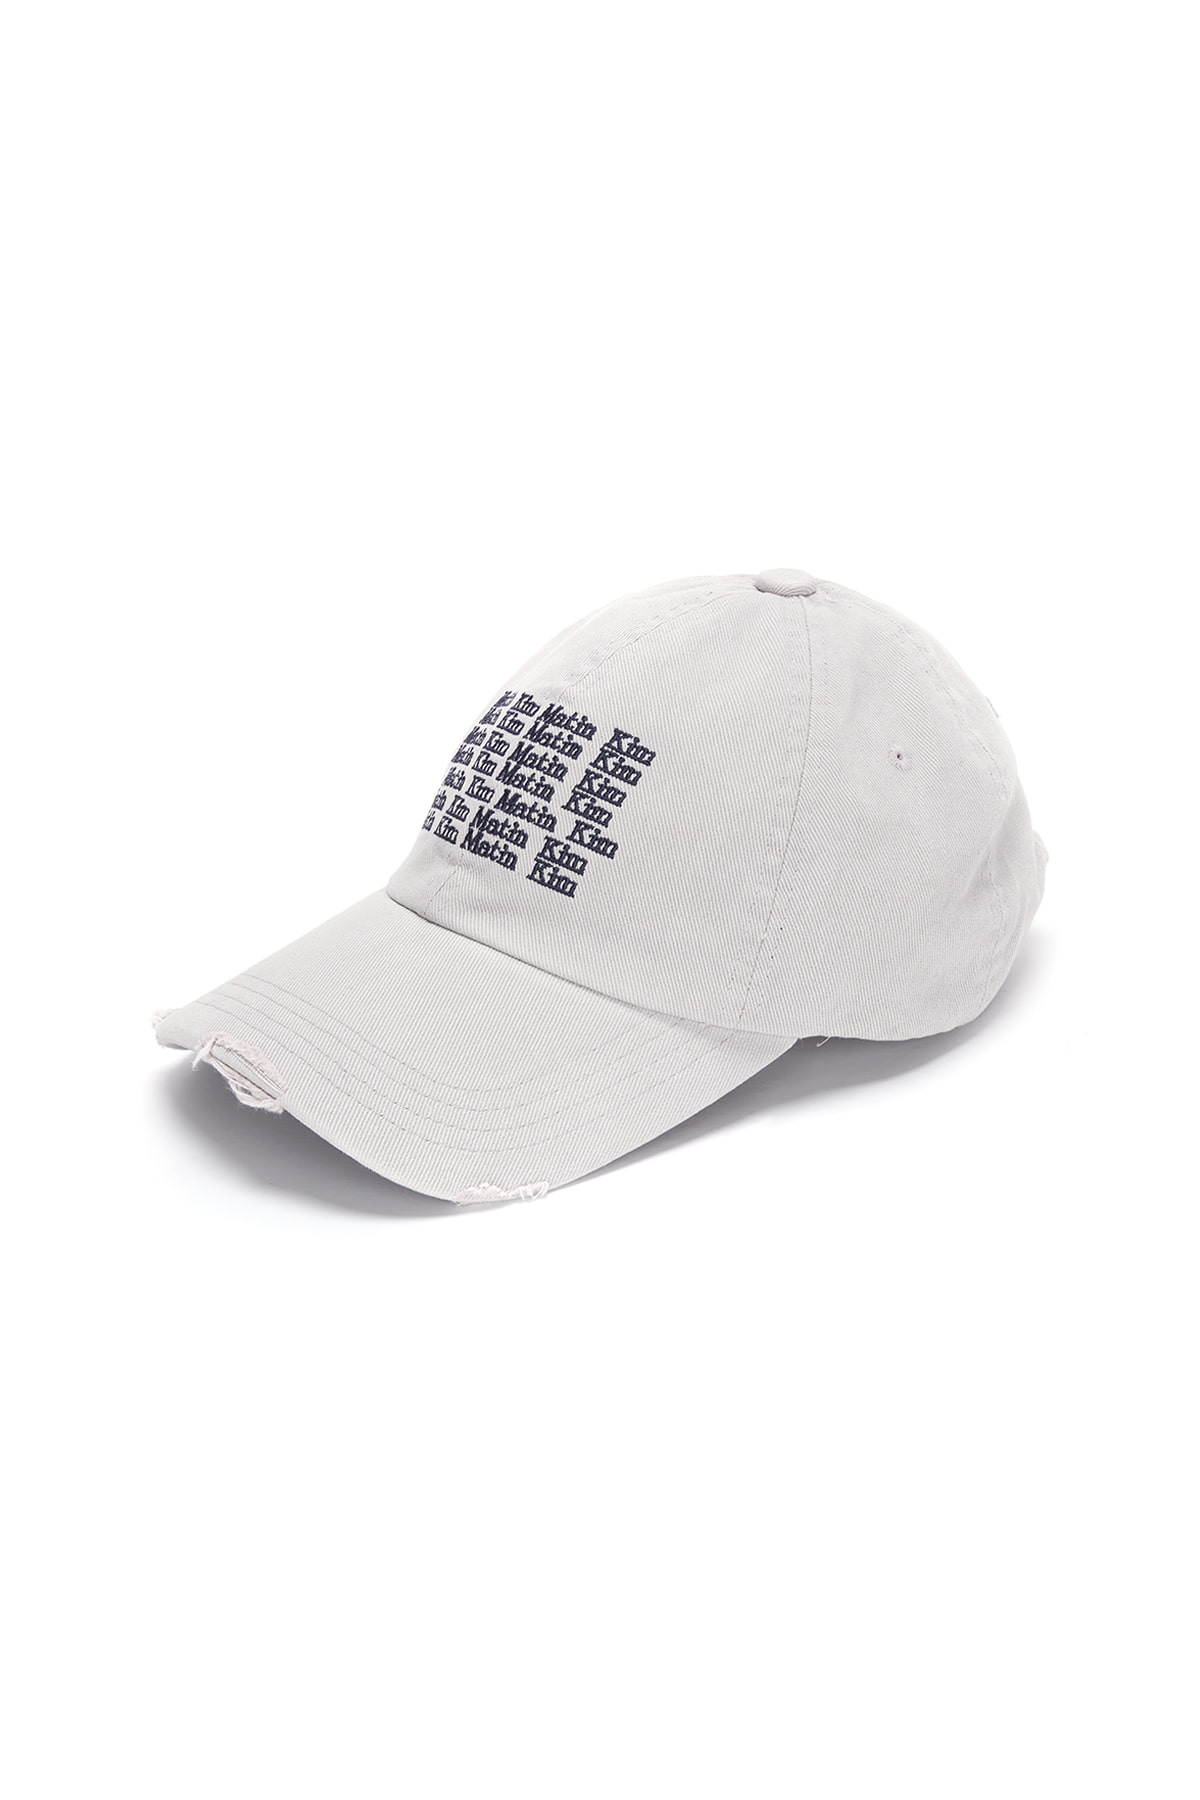 LETTERING WASHED BALL CAP IN LIGHT GREY